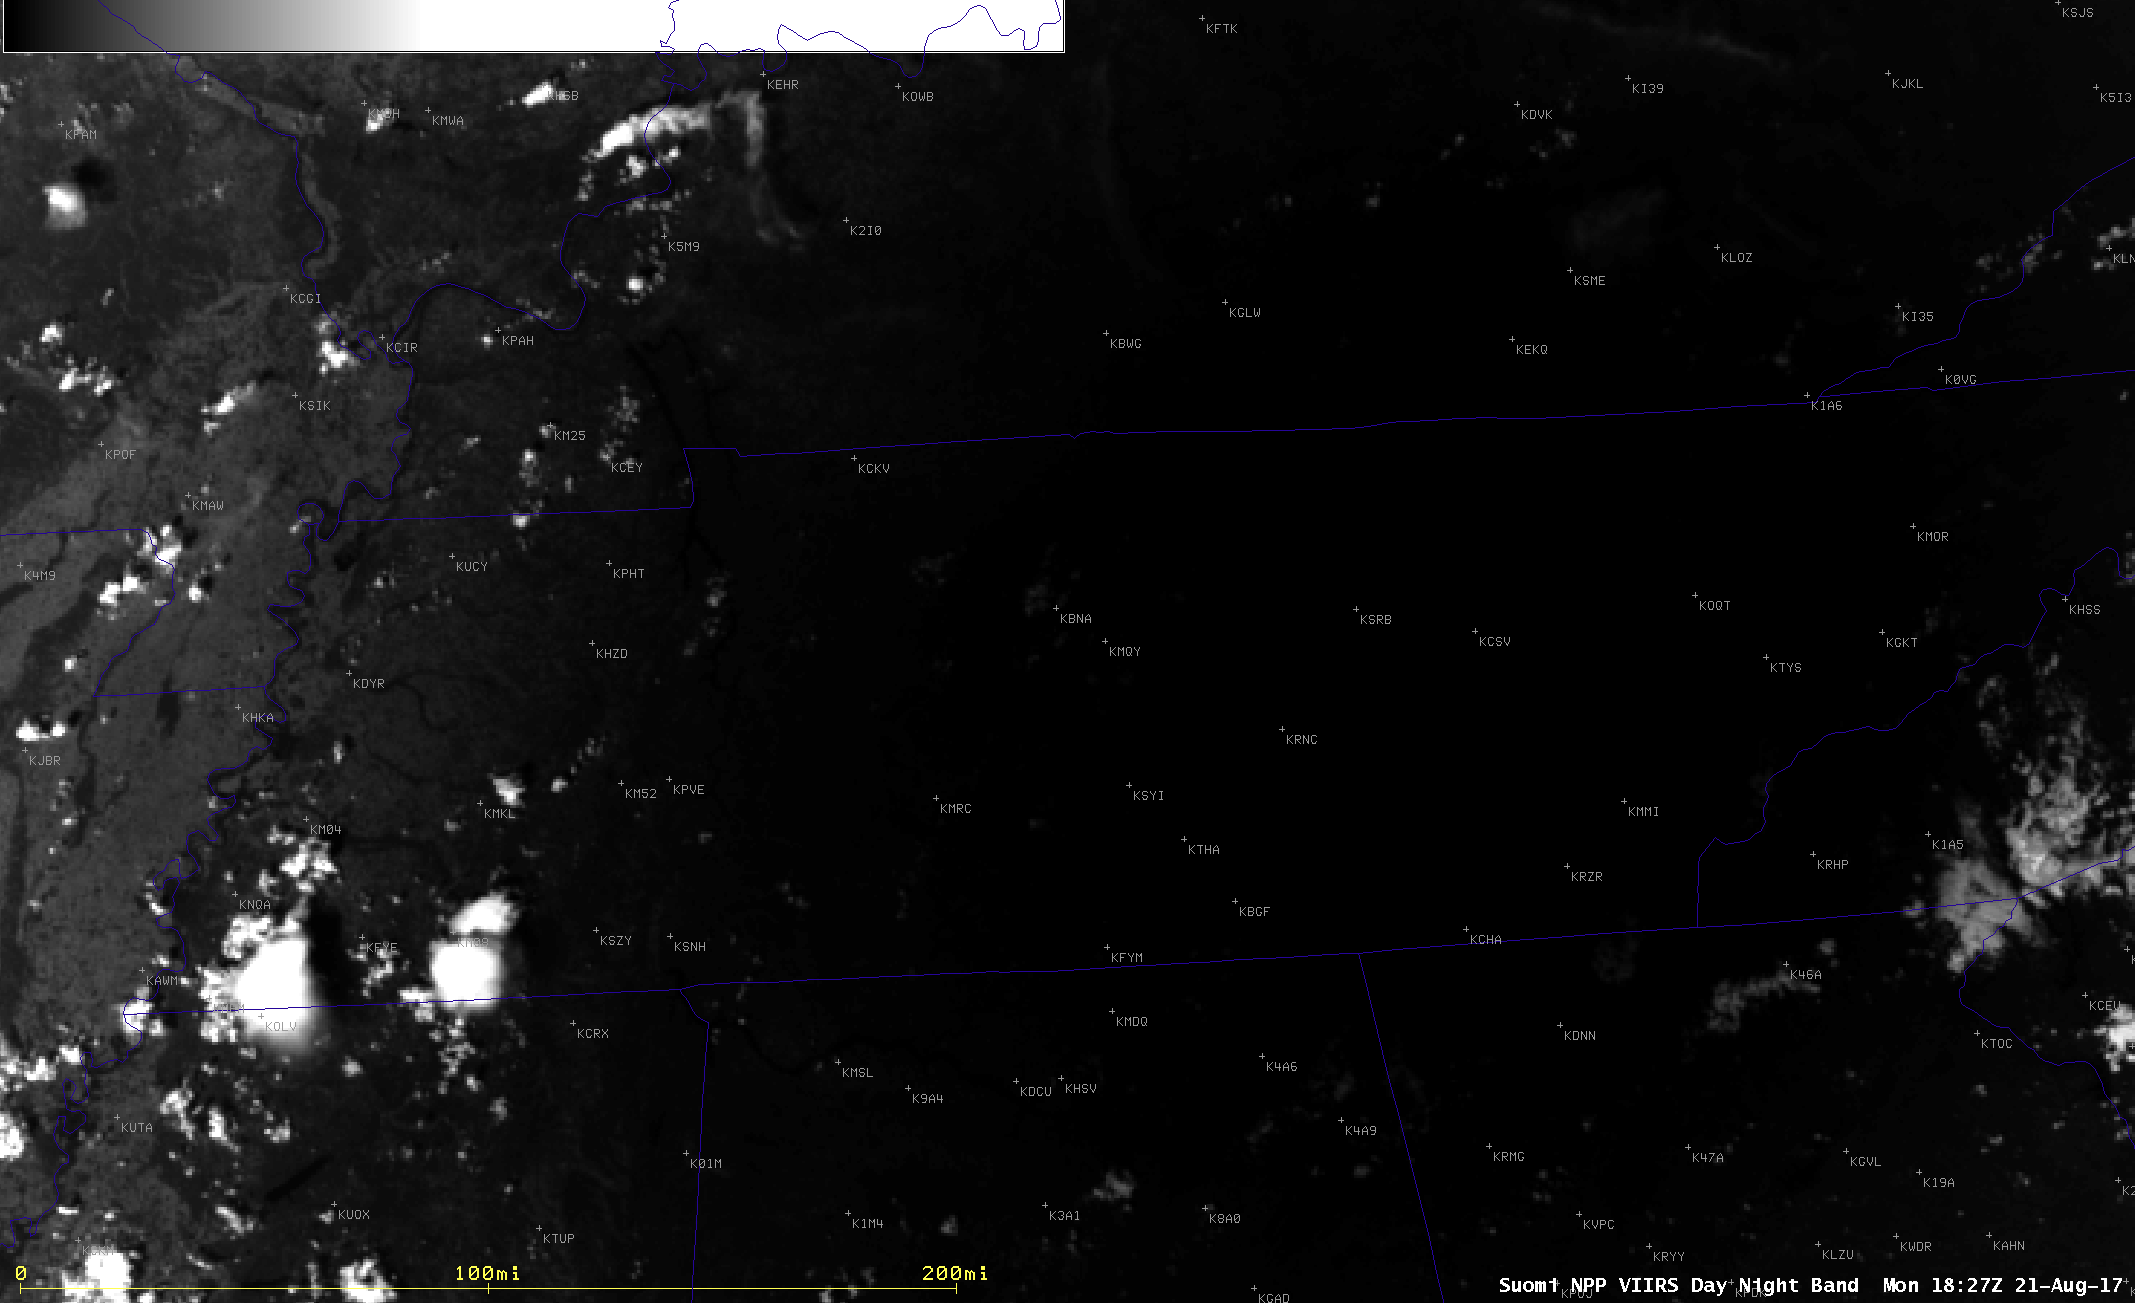 Suomi NPP VIIIRS Day/Night Band (0.7 µm) and Infrared Window (11.45 µm) images [click to enlarge]